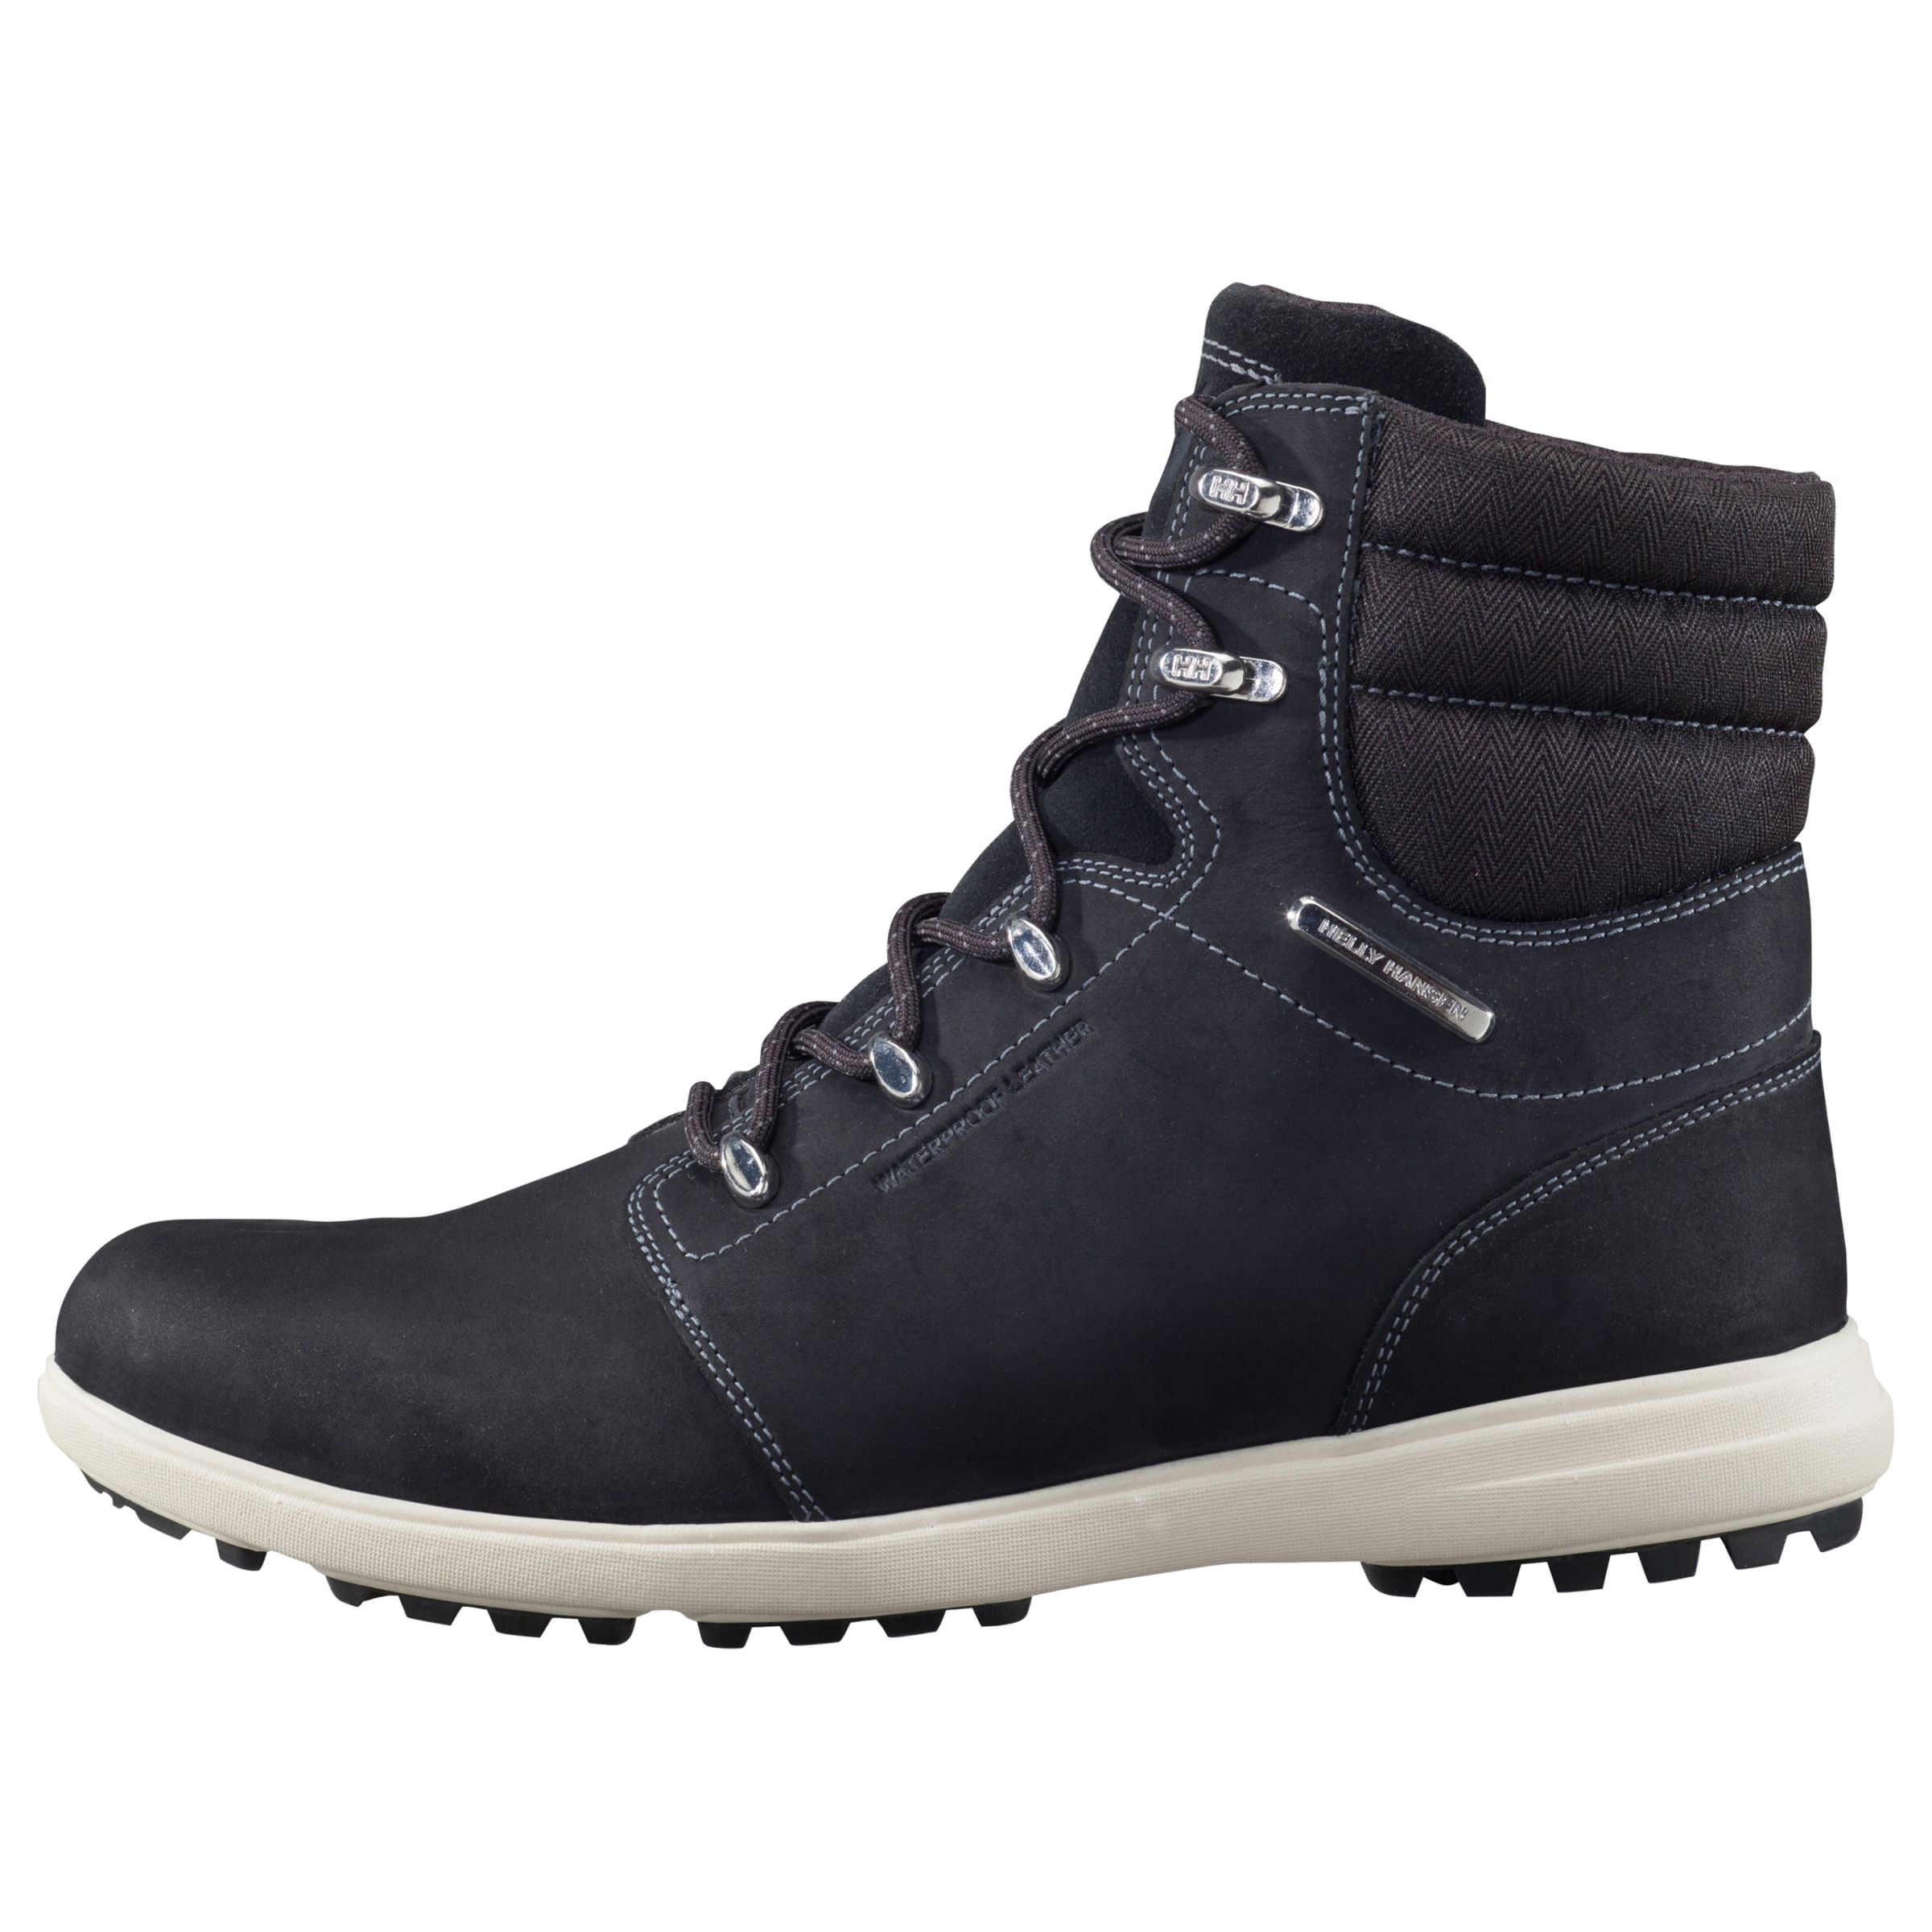 Helly Hansen A.S.T 2 Waterproof Leather Men's Boots, Charcoal